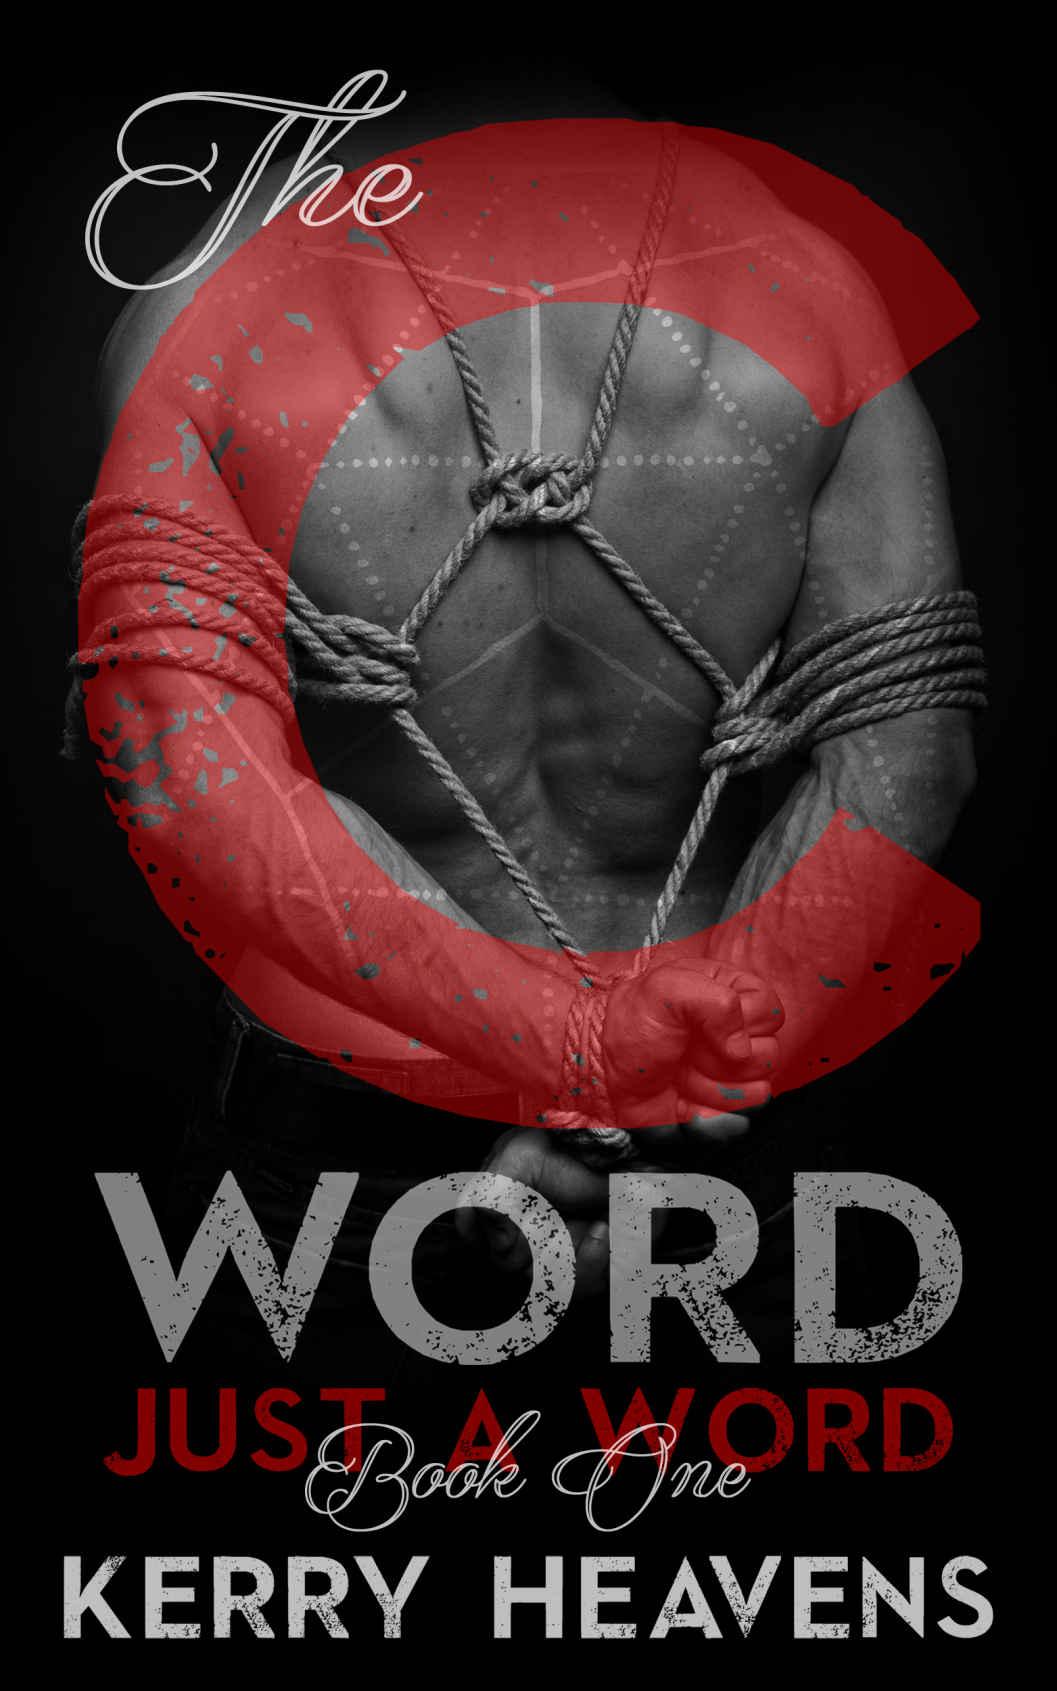 The C Word (Just a Word Book 1) by Kerry Heavens